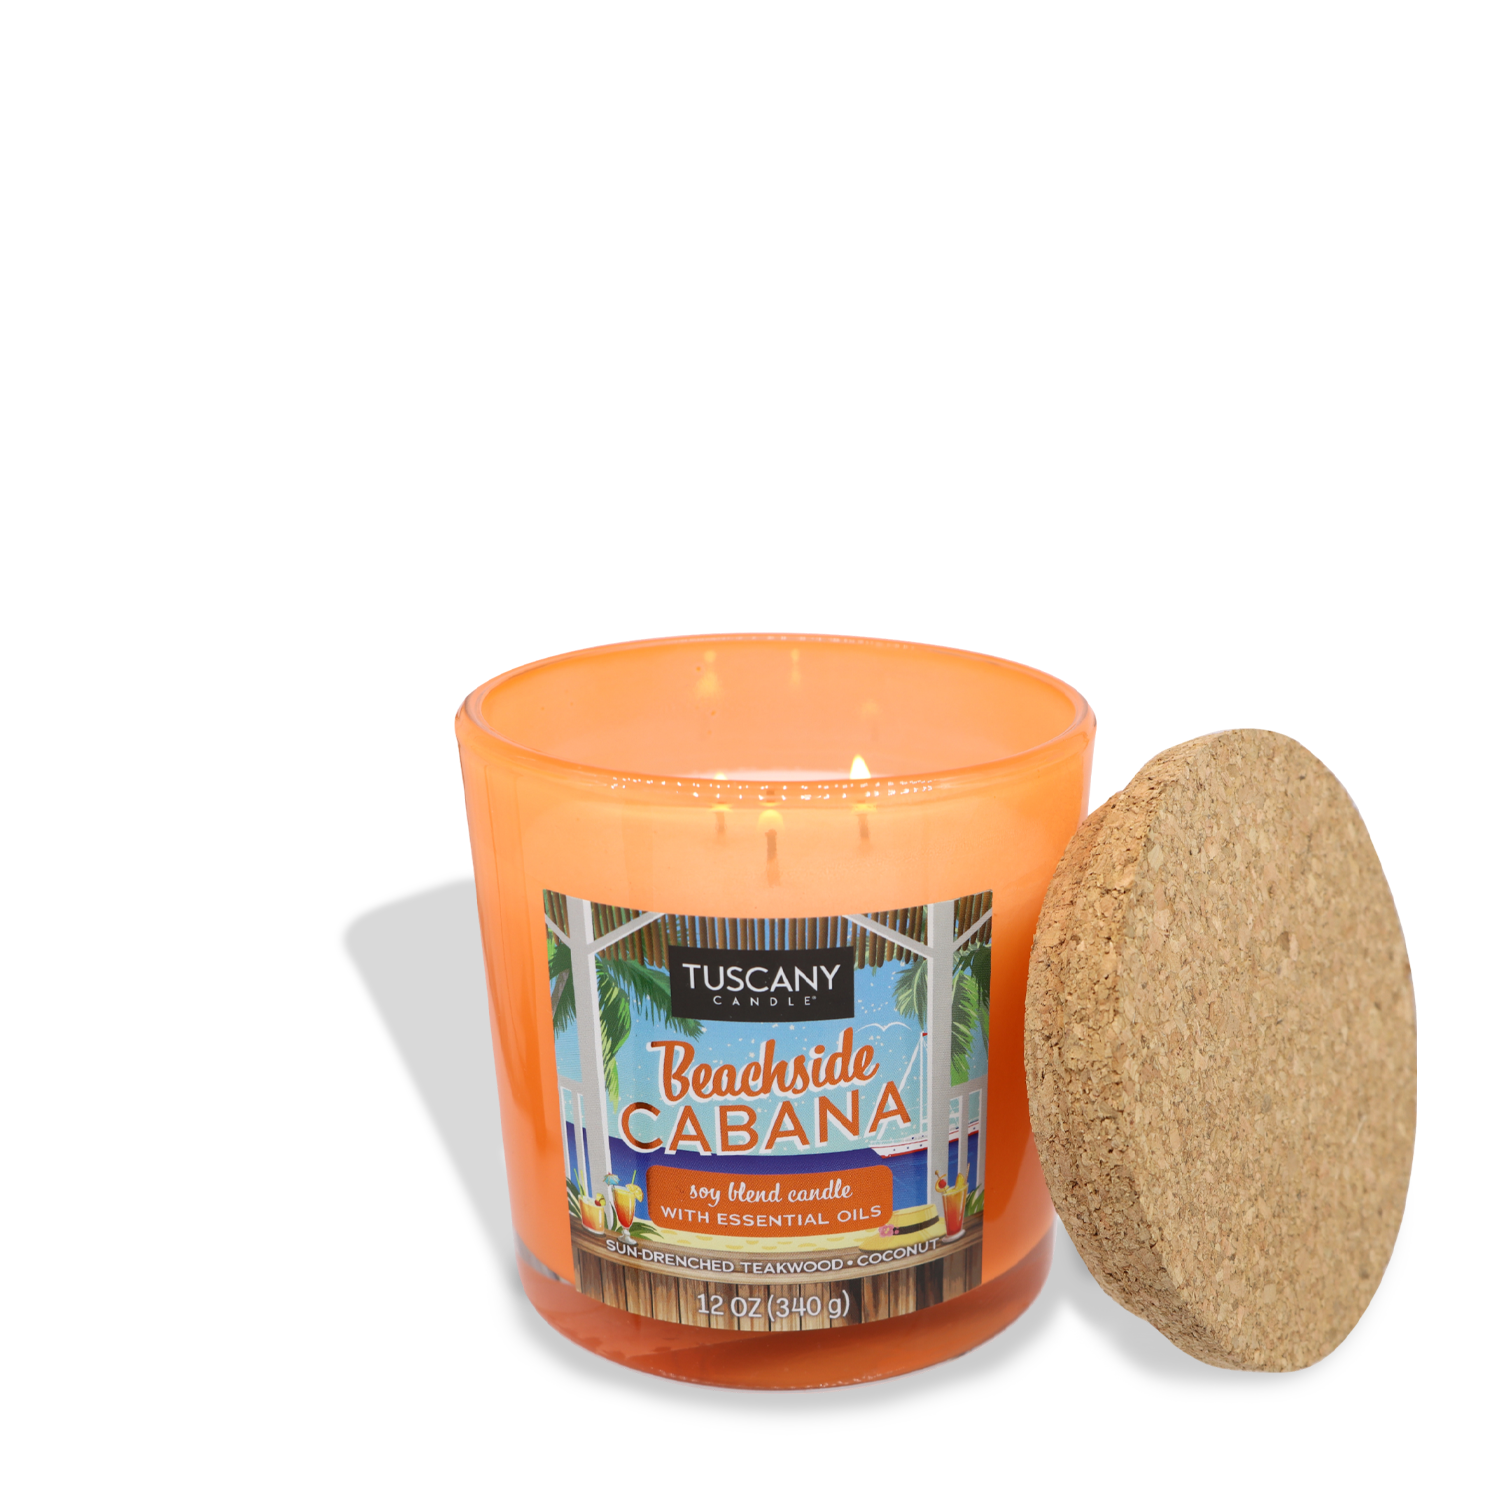 An orange Tuscany Candle® SEASONAL with a "Beachside Cabana" label and essential oils, featuring the warm scent of vanilla teak, lit and placed next to its cork lid.